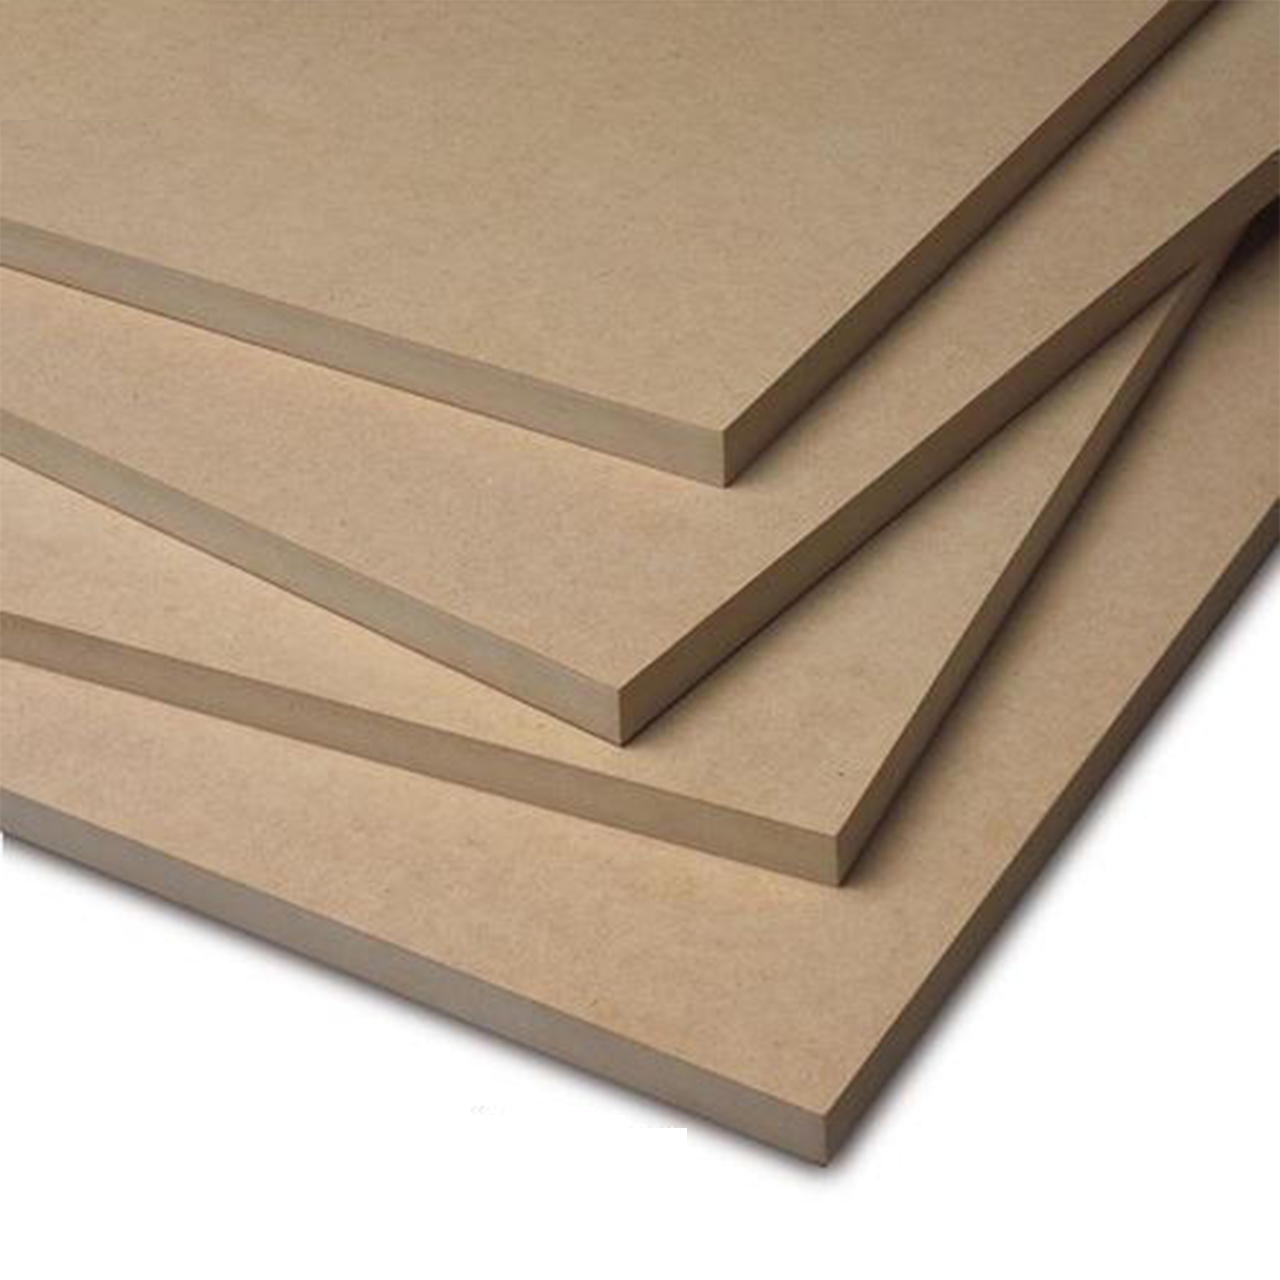 CRAFTIFF MDF Board 1/8 inch Thick, A3 Size Chipboard - 3 Pack: Buy Online  at Best Price in UAE 